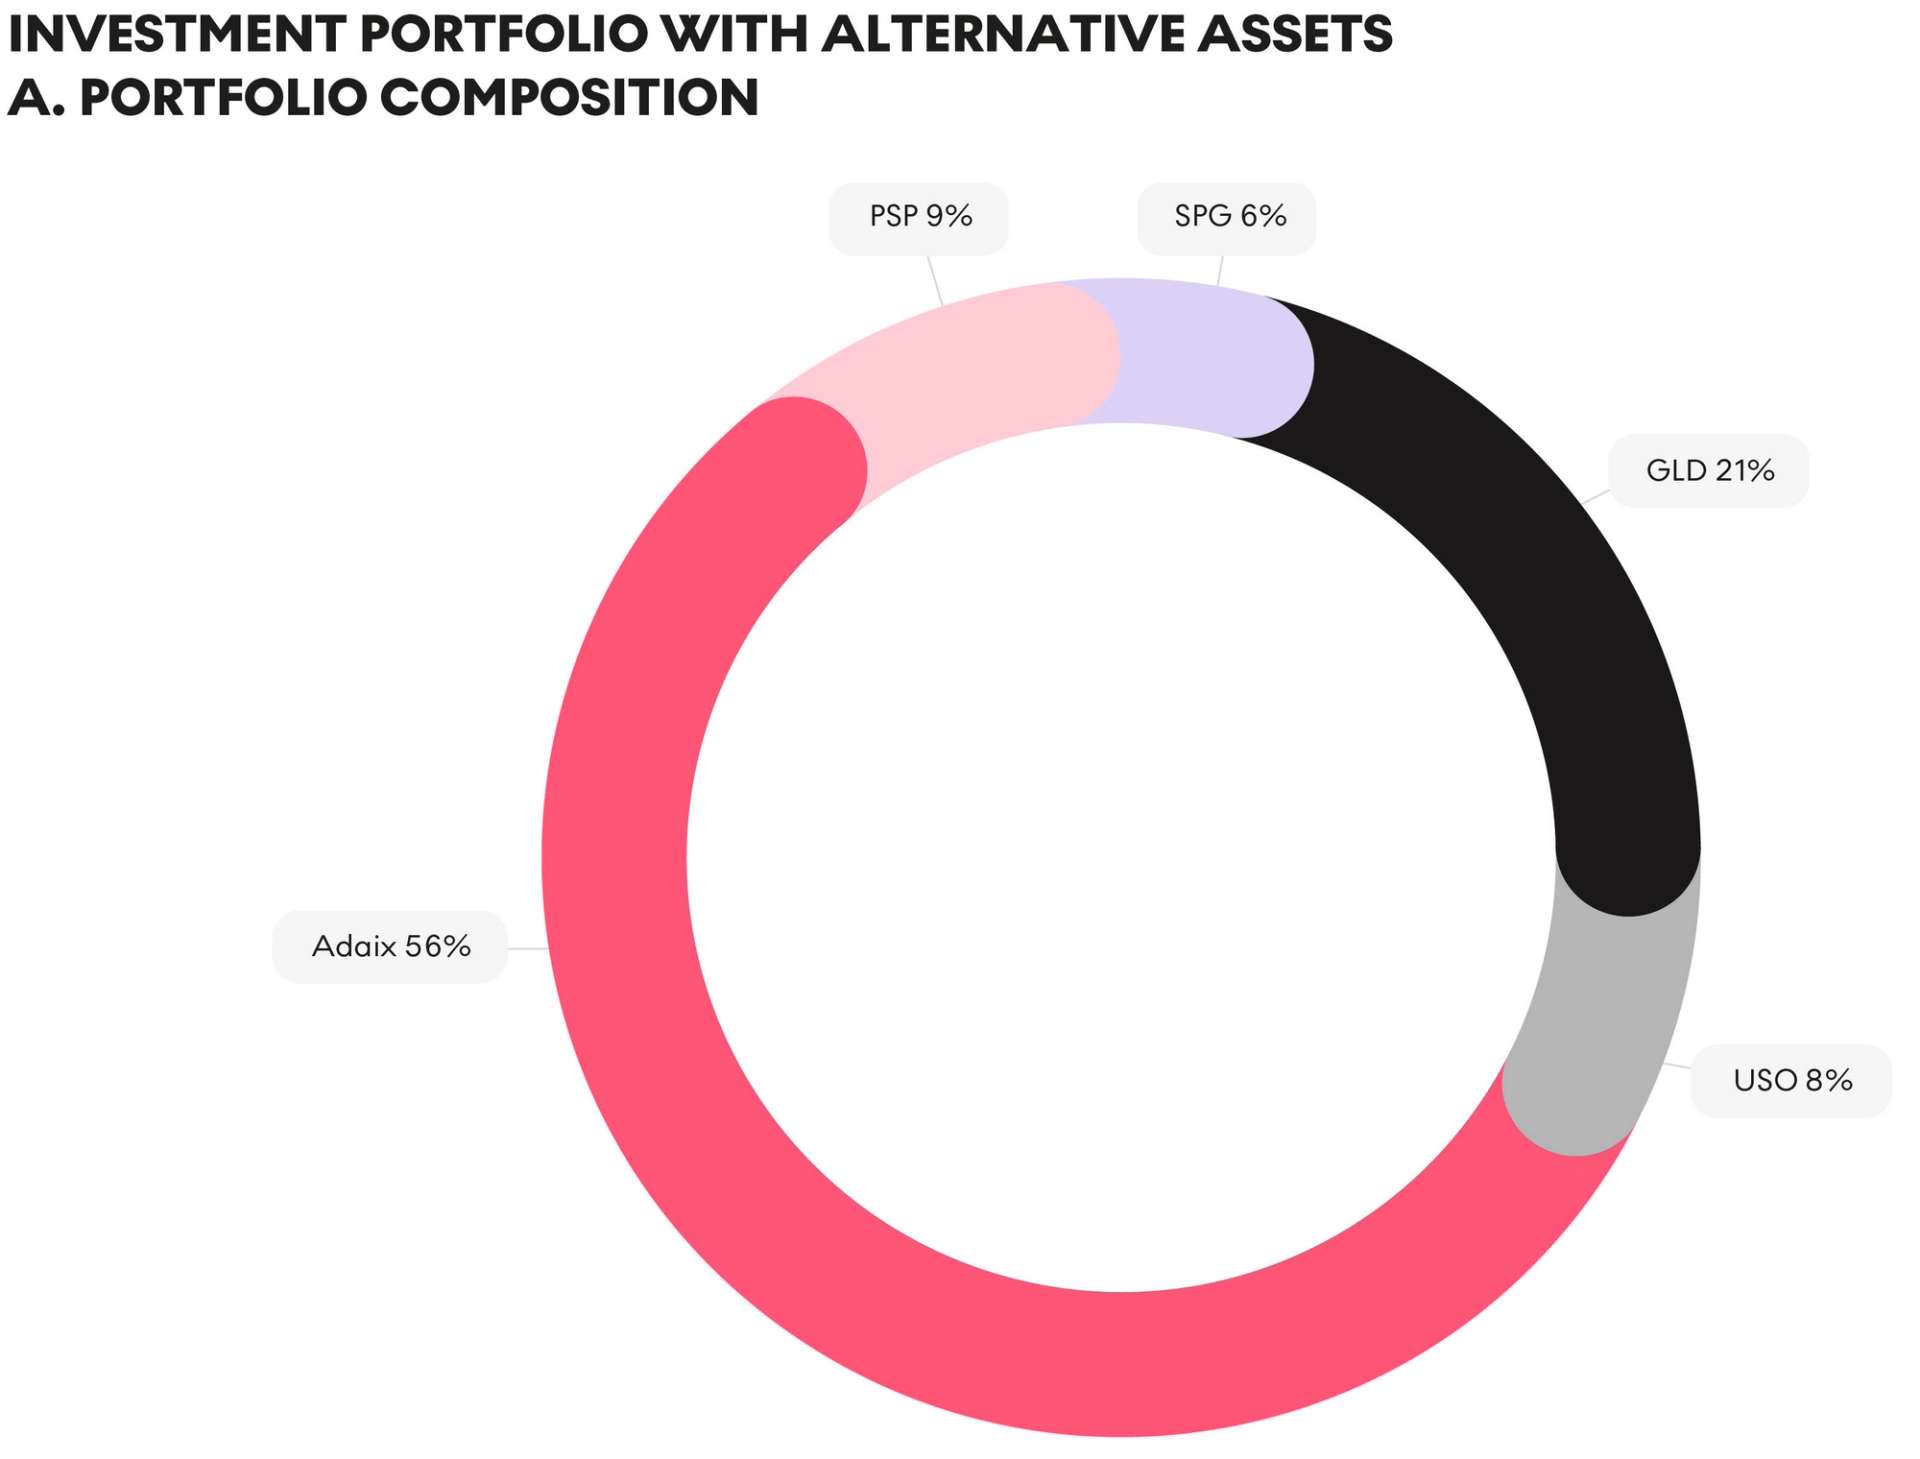 Composition of Investment Portfolio with Alternative Assets